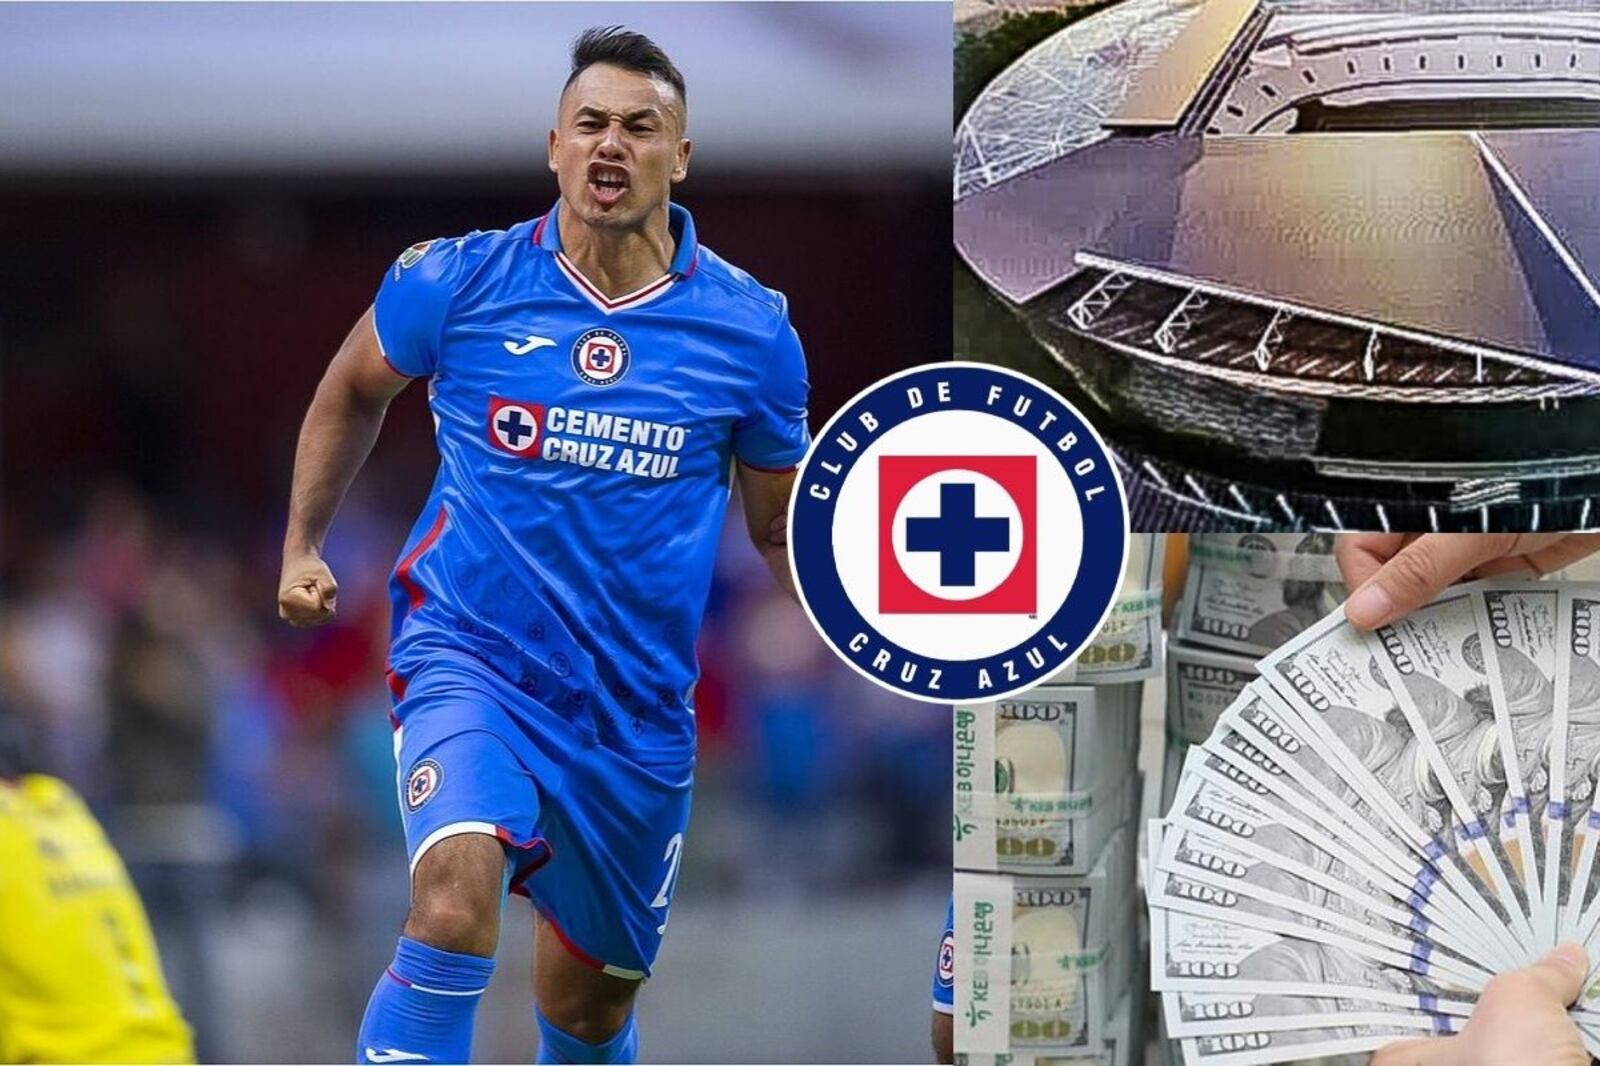 The millionaire who could buy Cruz Azul and build their new stadium